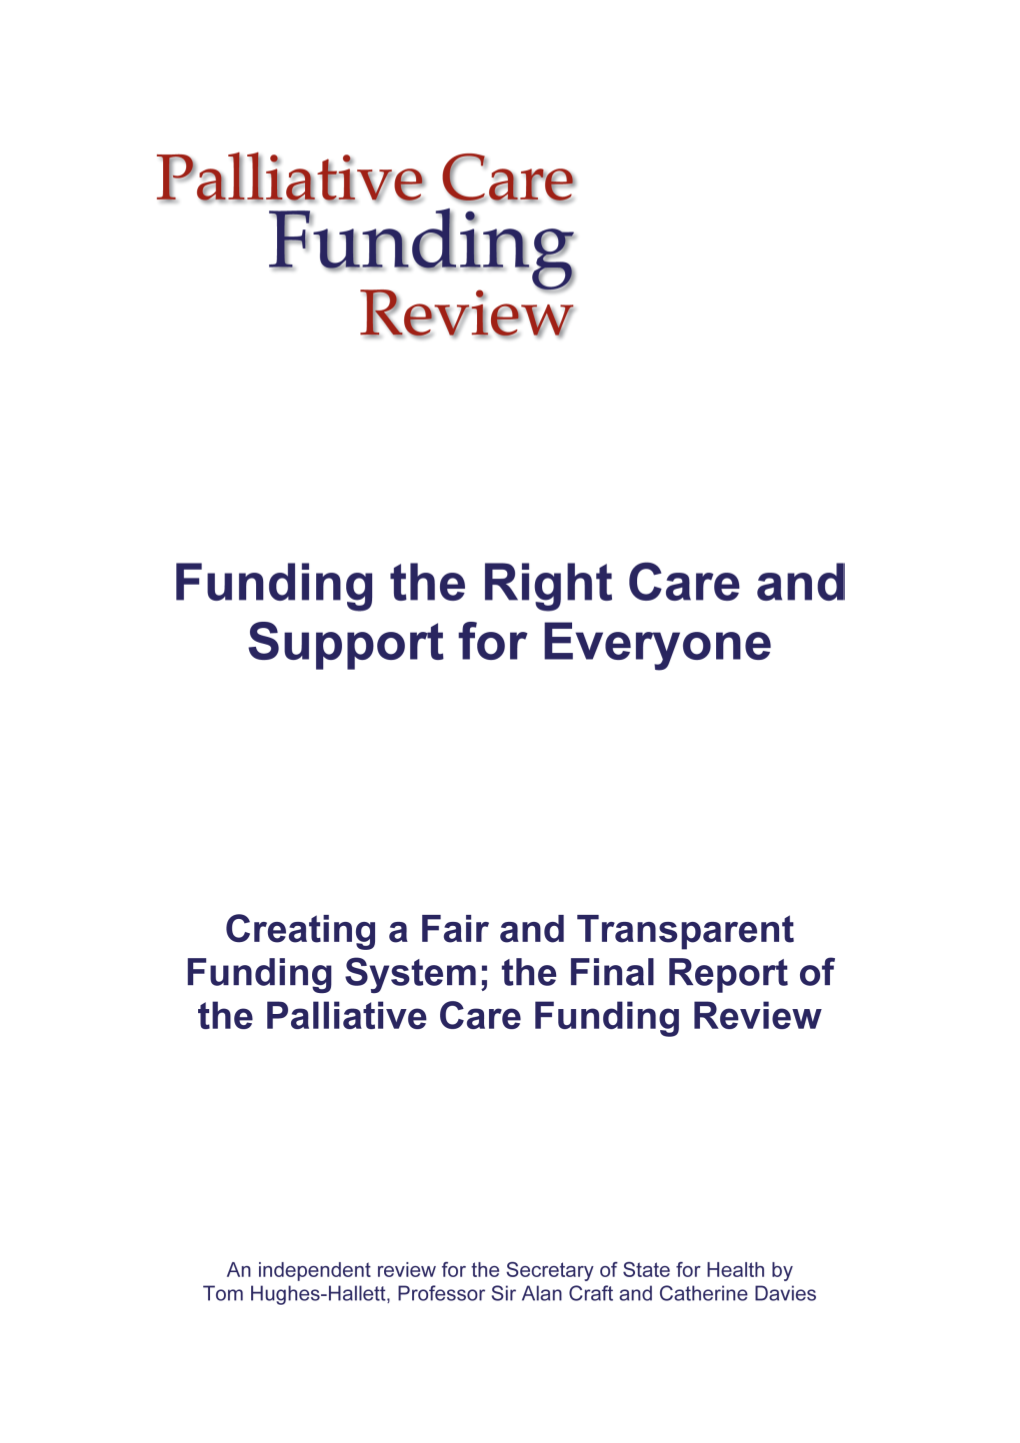 The Final Report of the Palliative Care Funding Review July 2011